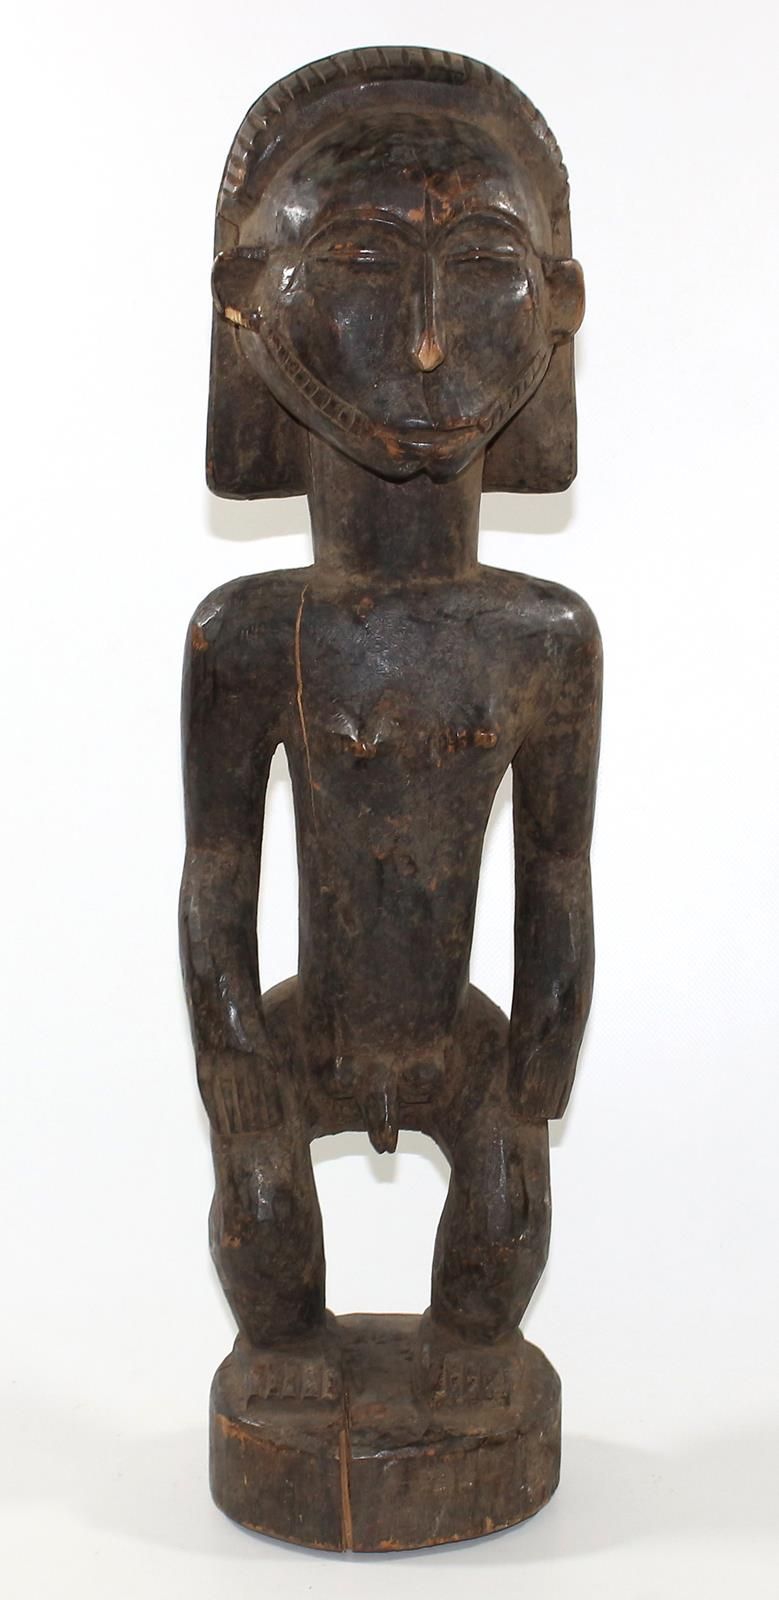 Hemba, D.R. Kongo. Standing ancestor figure with crested hairstyle. Wood with da&hellip;